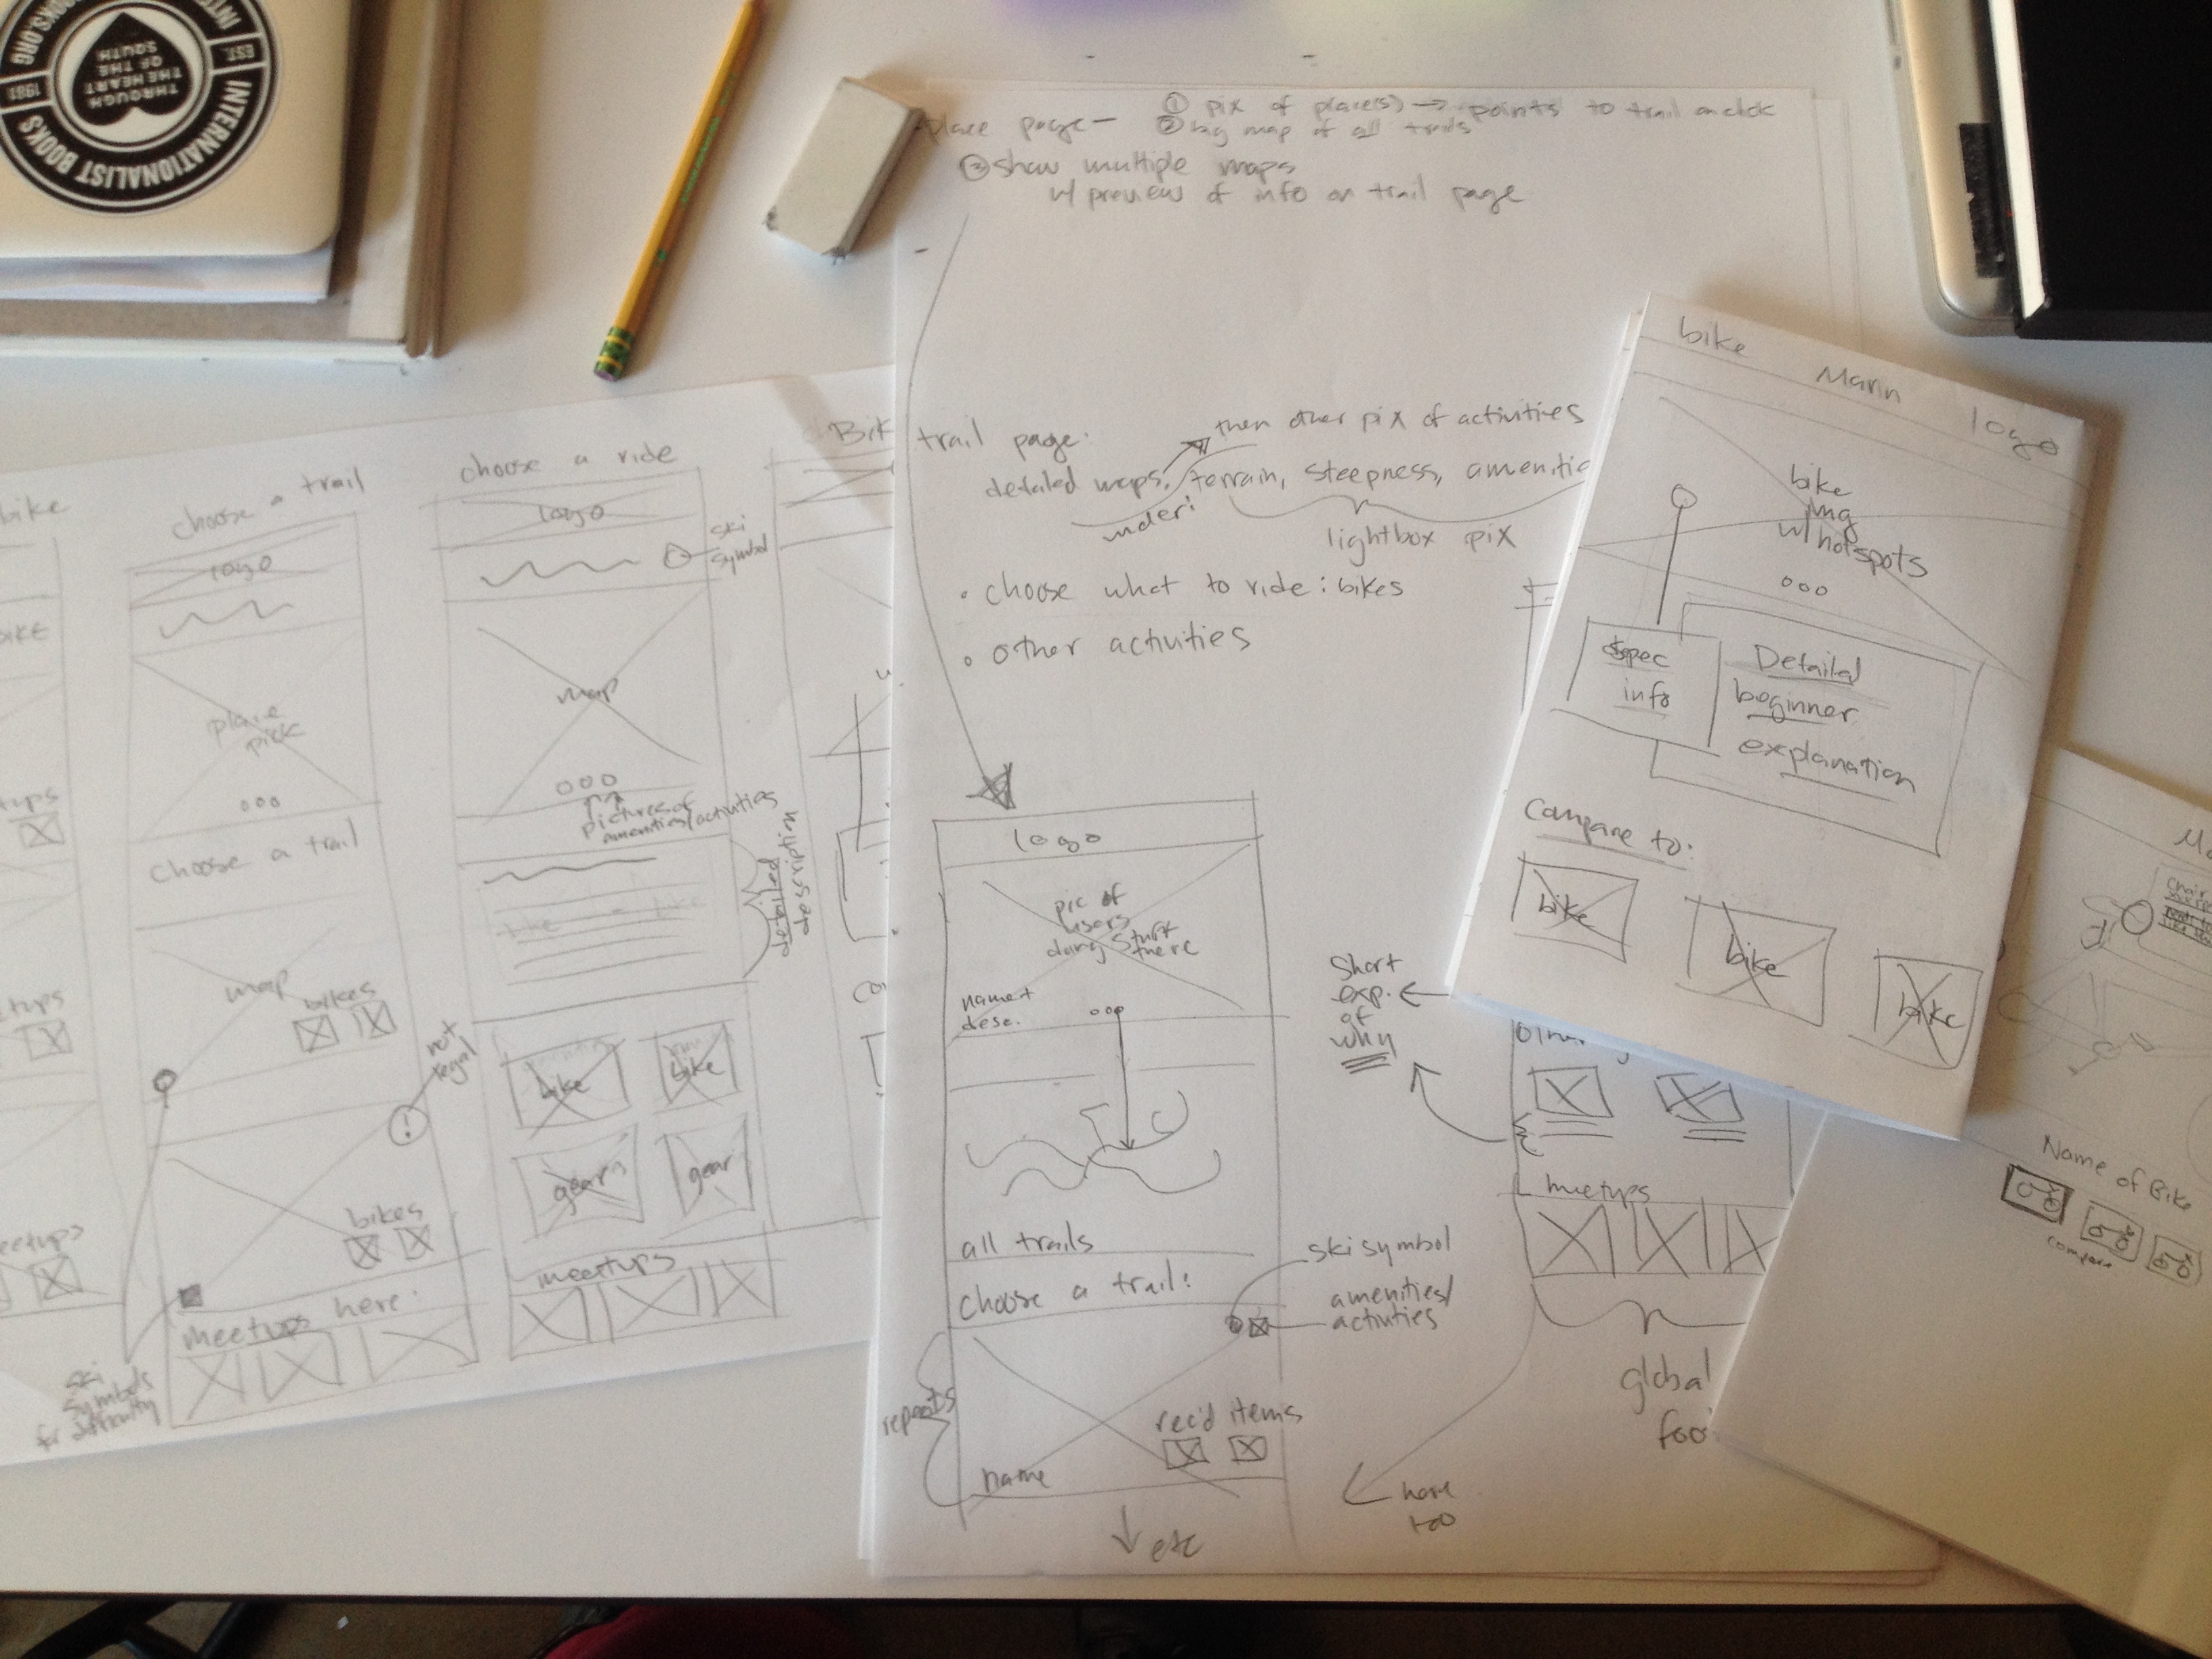 Image of brainstorming sketching exercise lead by my partner